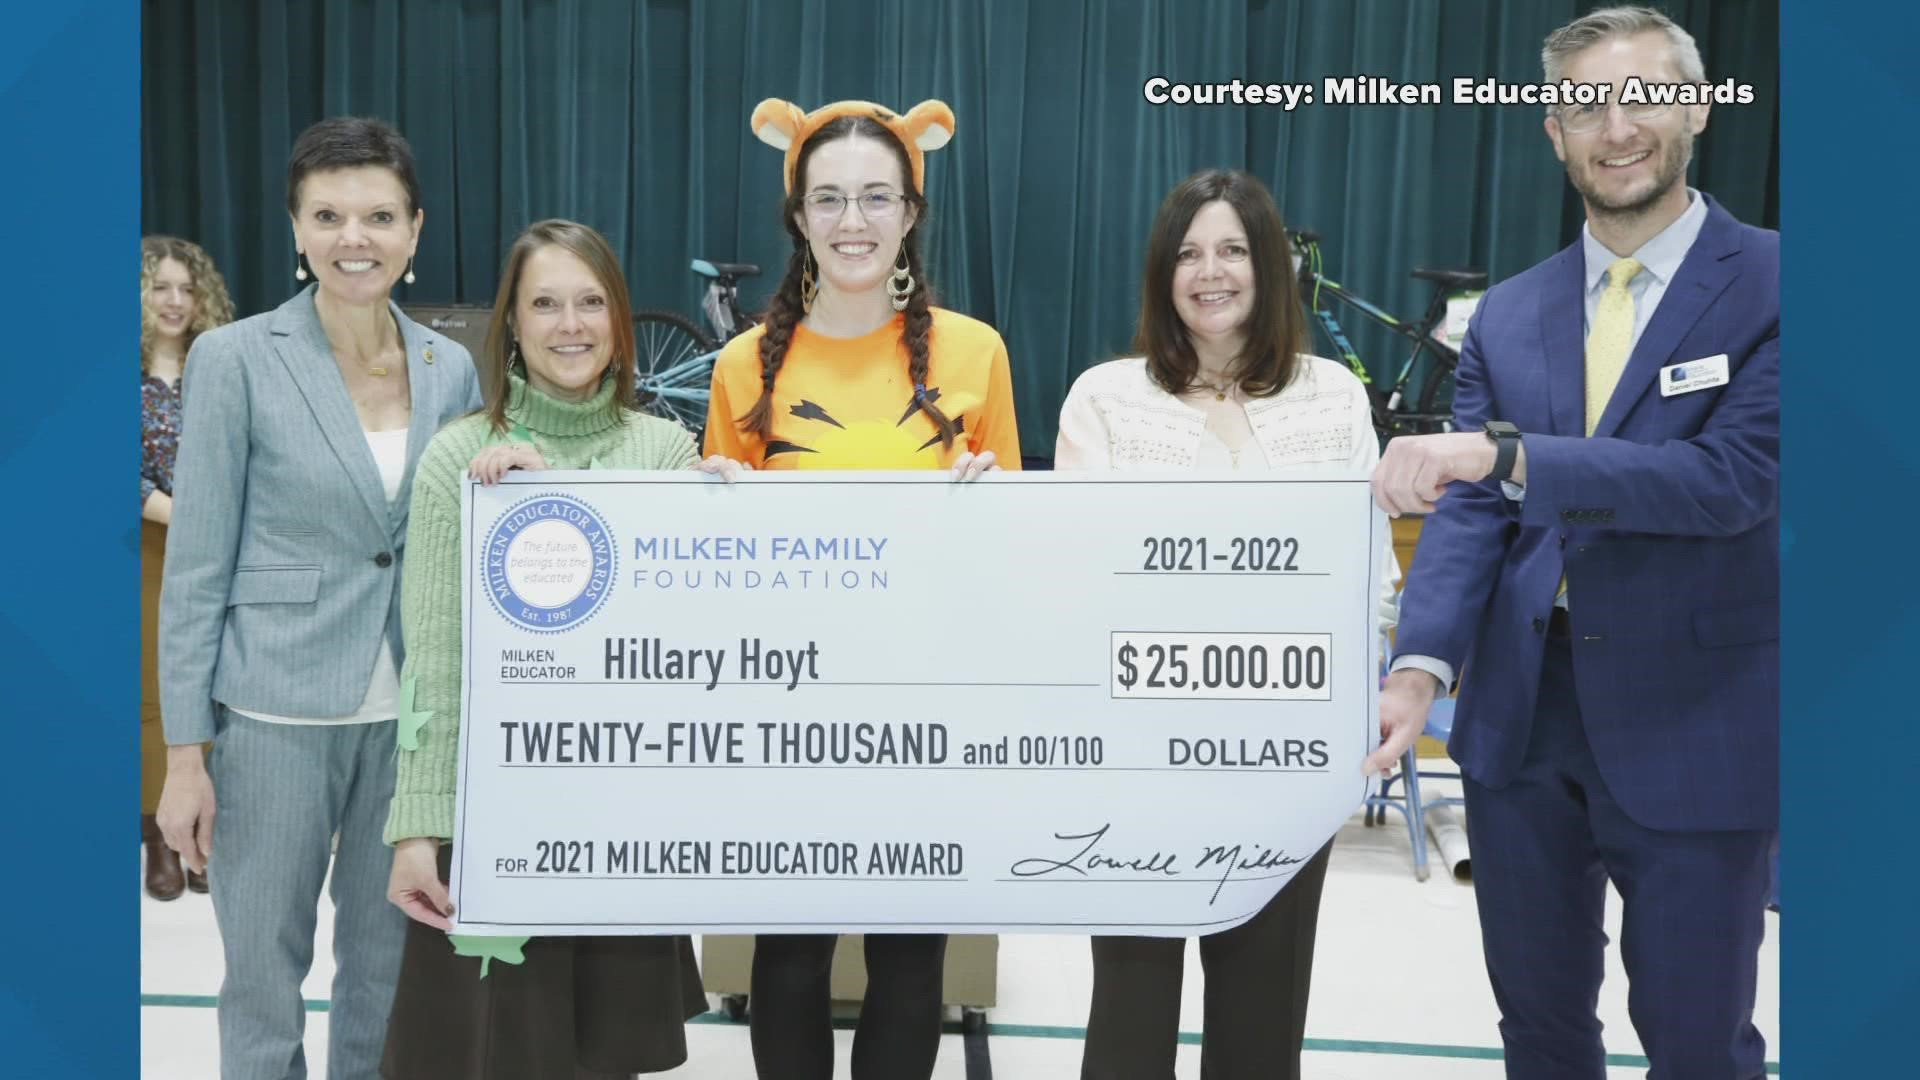 Hillary Hoyt and Jamie Karaffa were honored Tuesday with the awards, which come with $25,000.